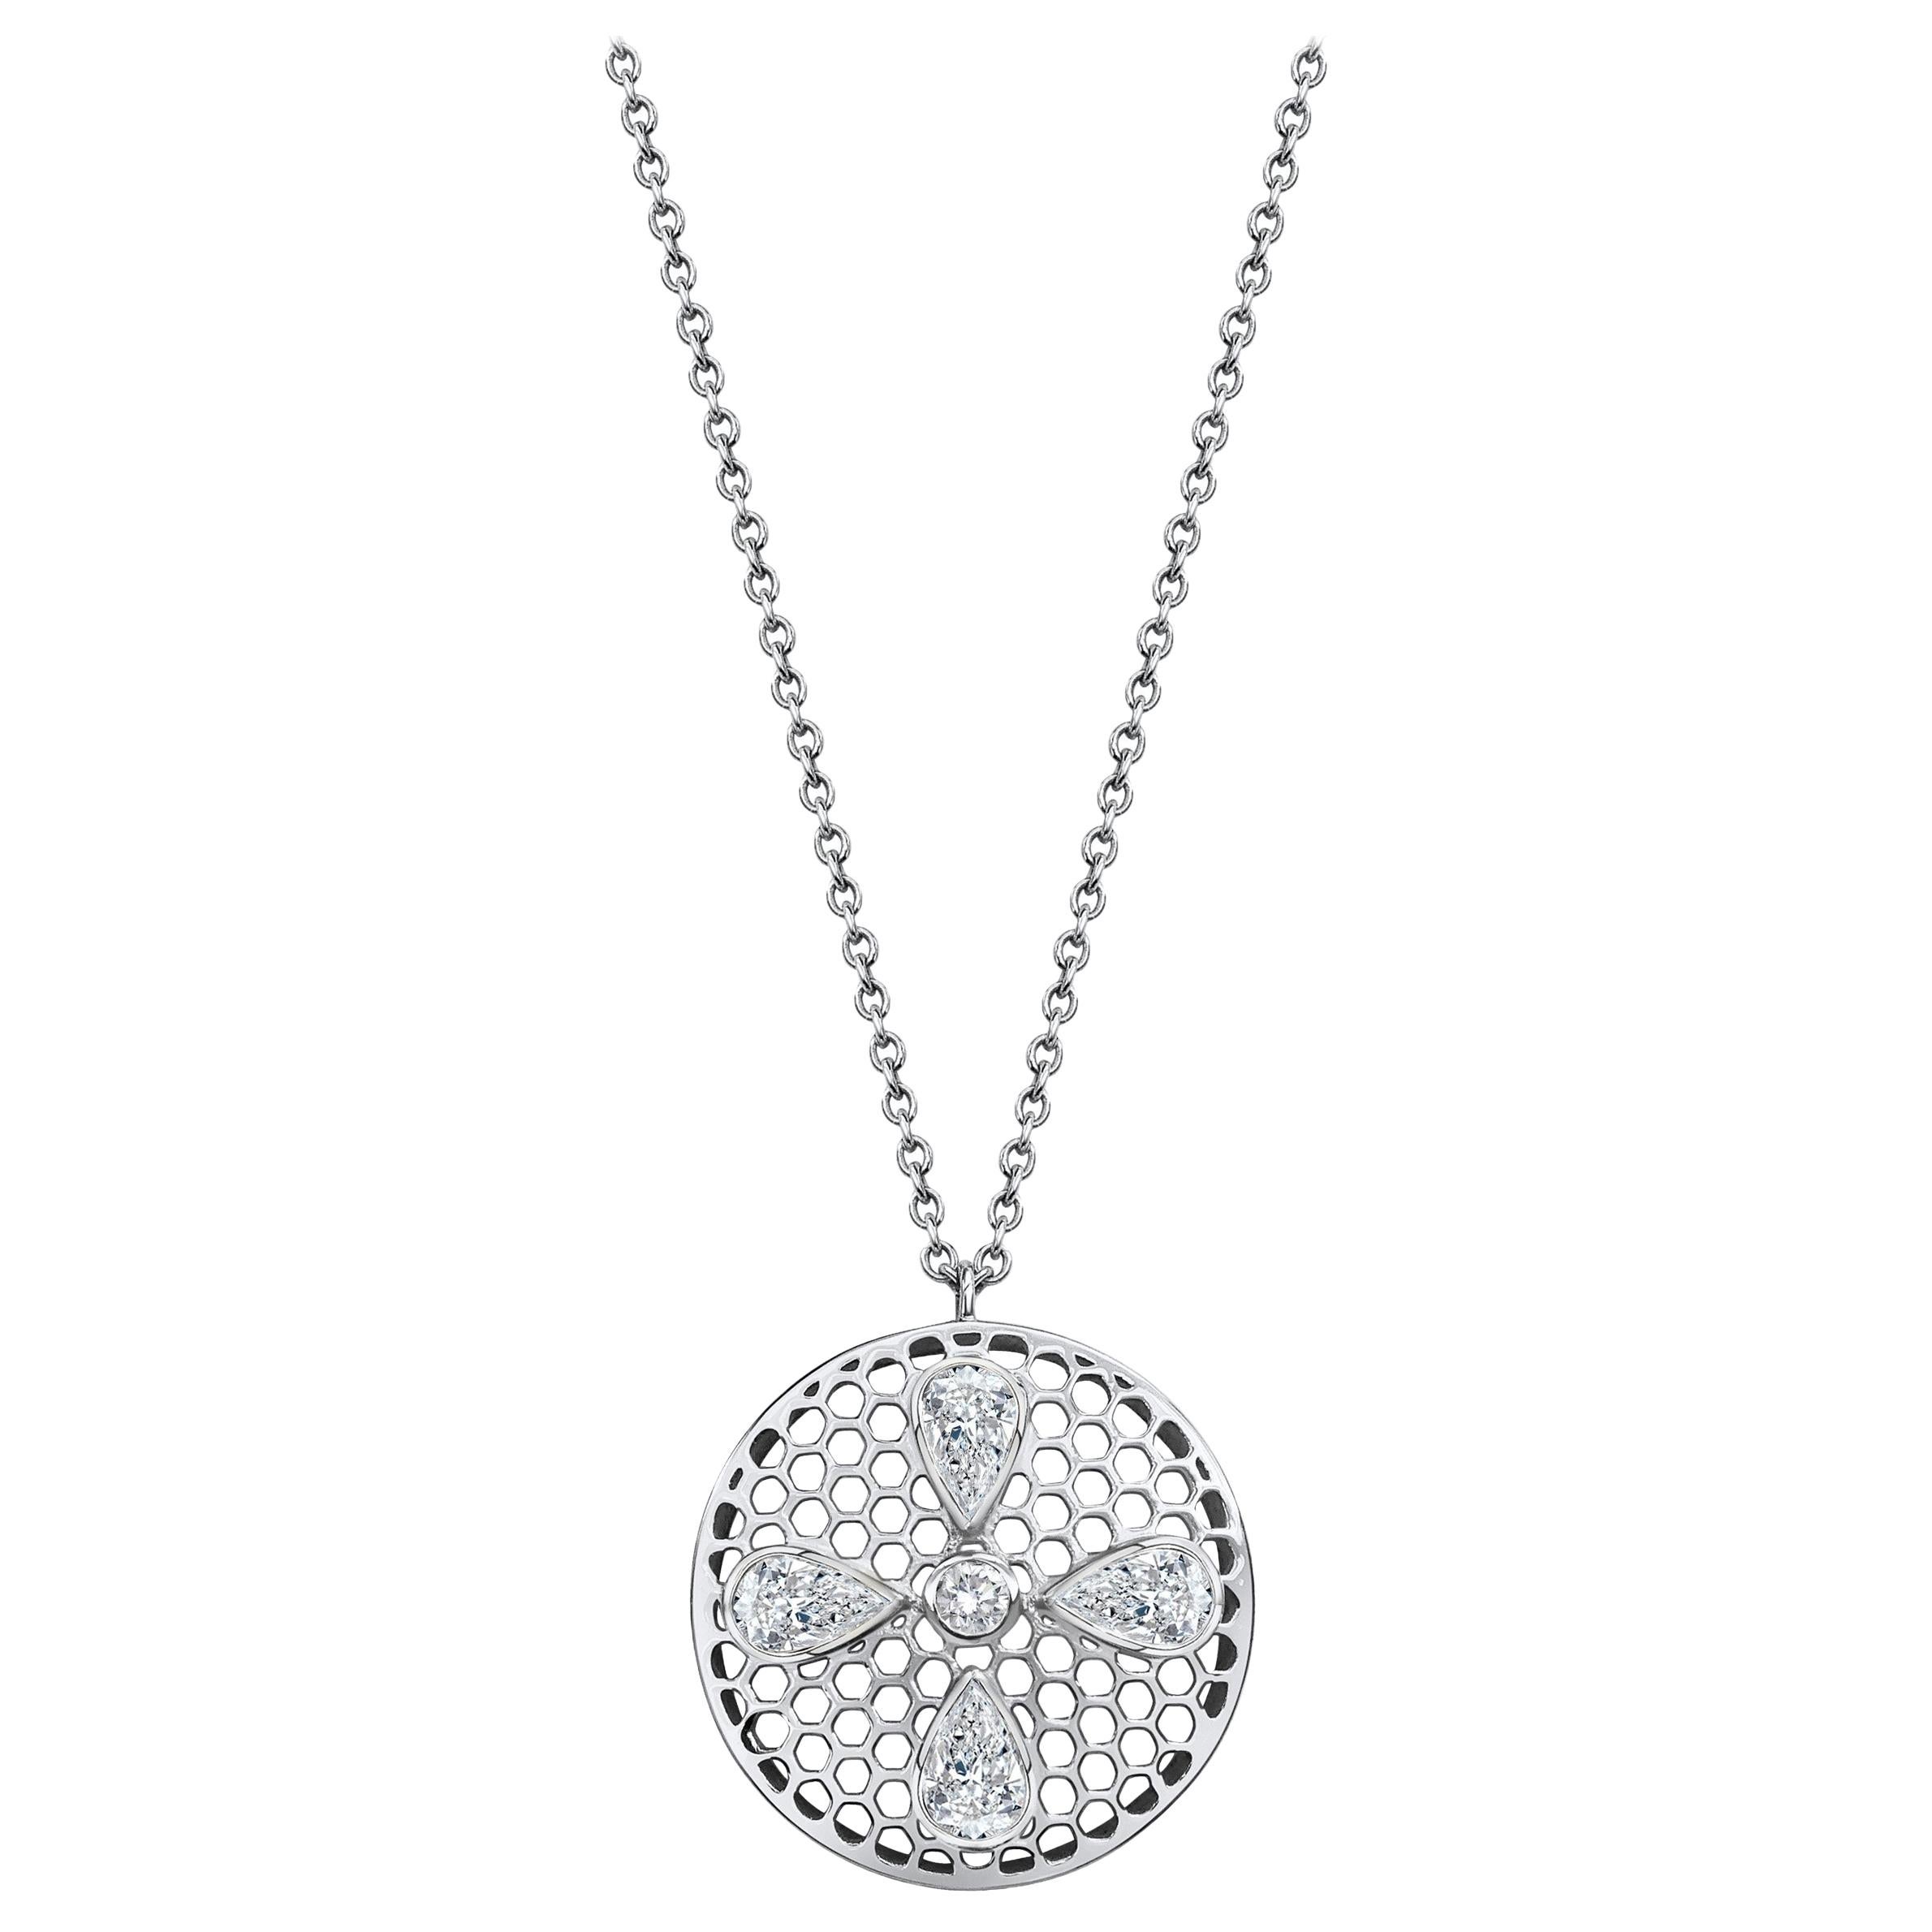 Handcrafted Diamonds and 18 Karat White Gold Pendant Necklace